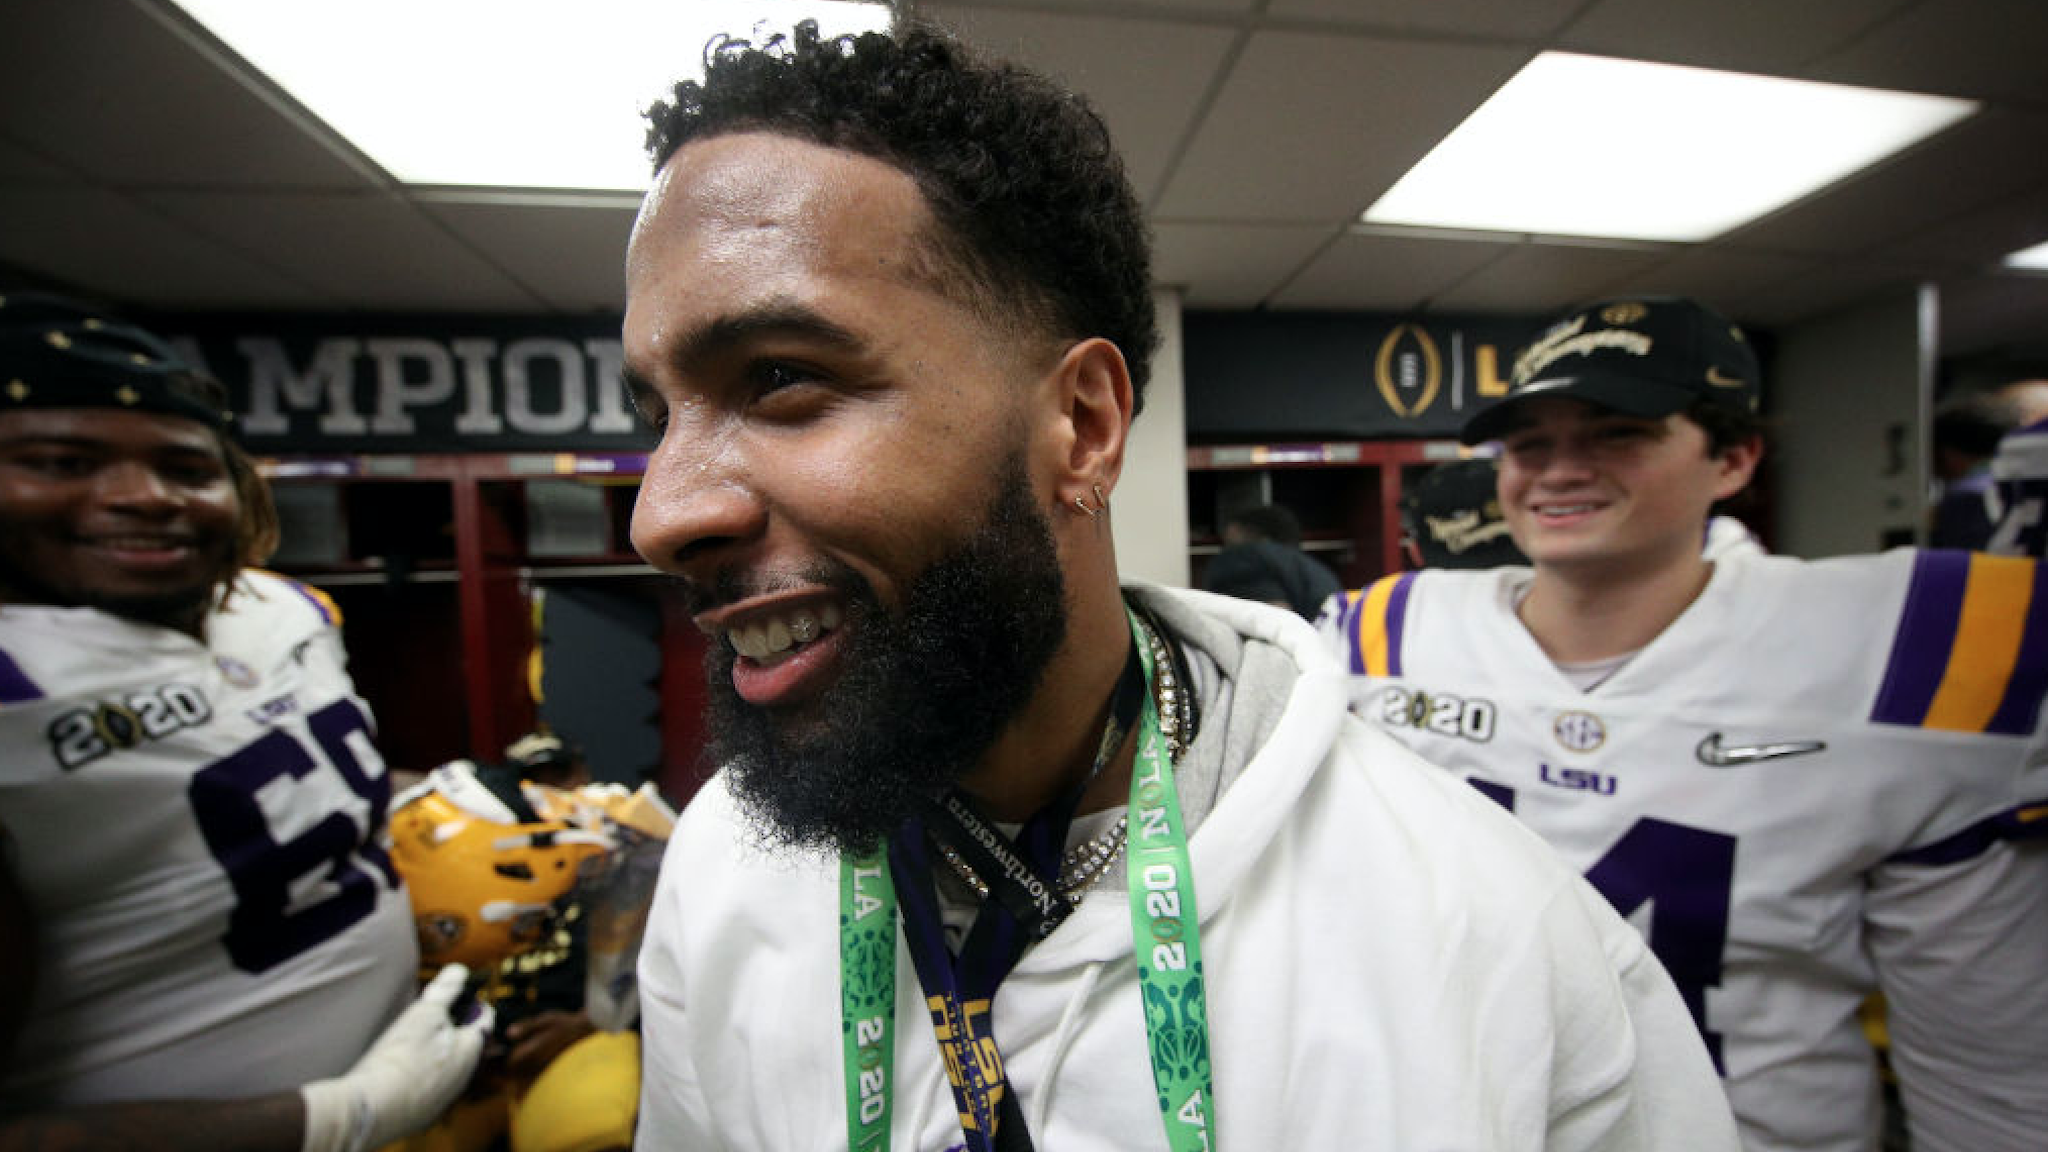 Odell Beckham Jr. celebrates in the locker room the LSU Tigers after their 42-25 win over Clemson Tigers in the College Football Playoff National Championship game at Mercedes Benz Superdome on January 13, 2020 in New Orleans, Louisiana.